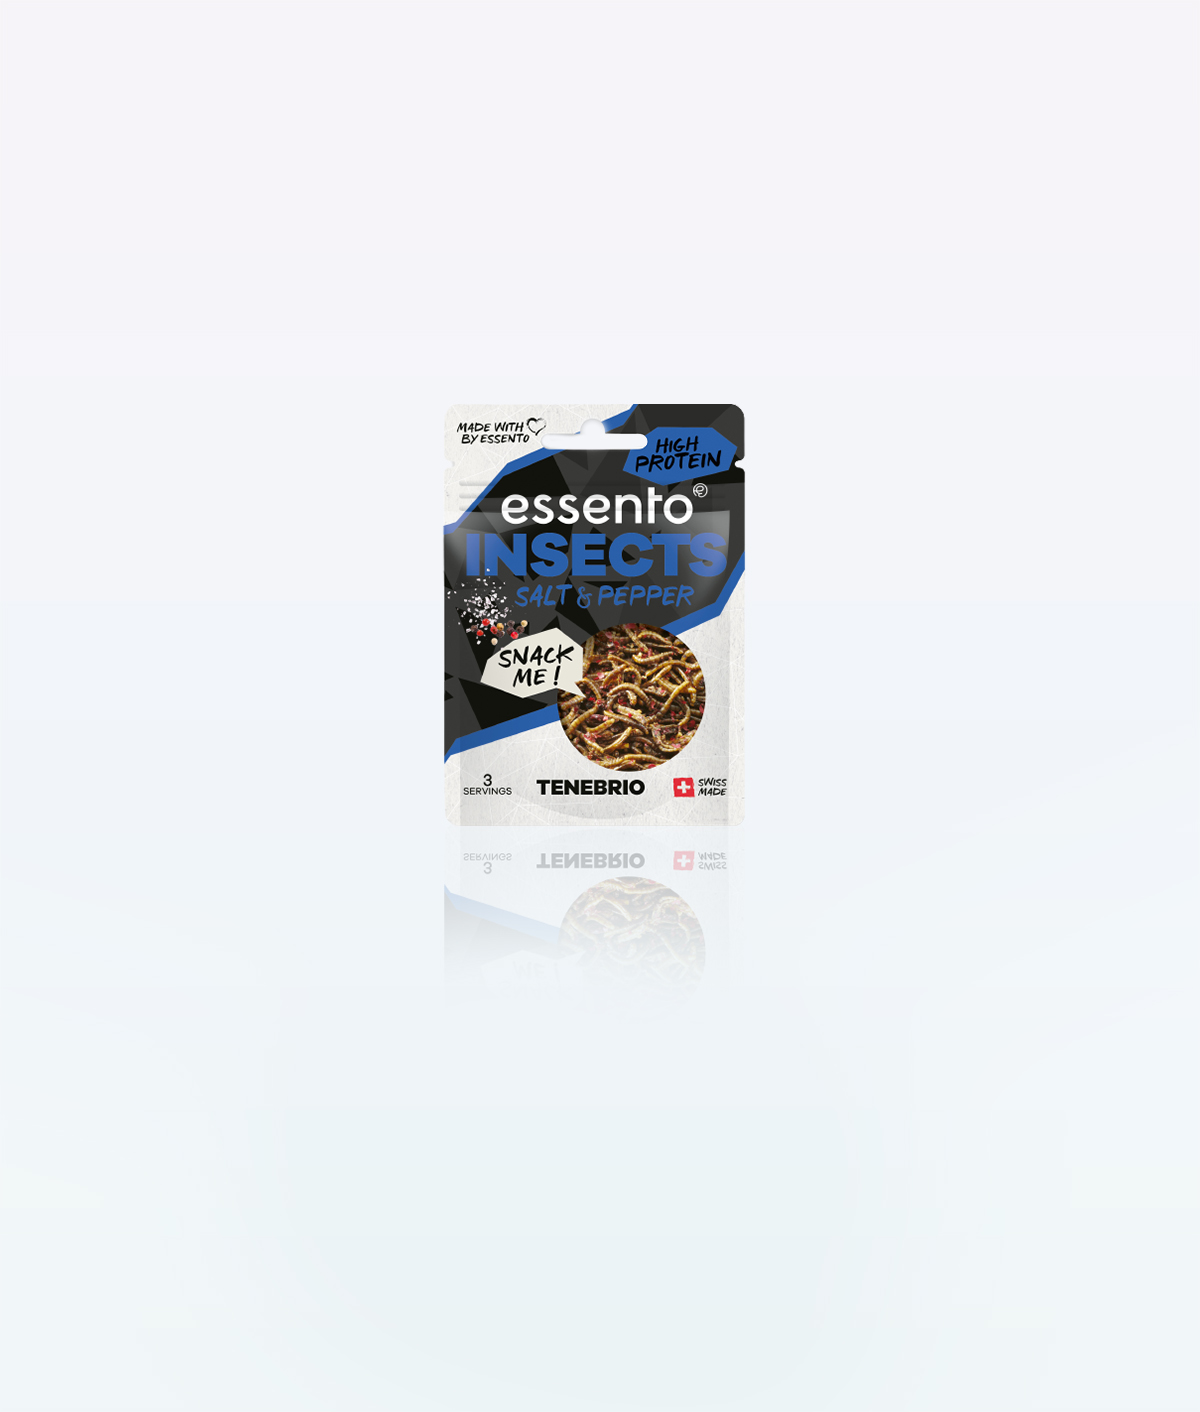 Essento Salt And Pepper Insect Snacks